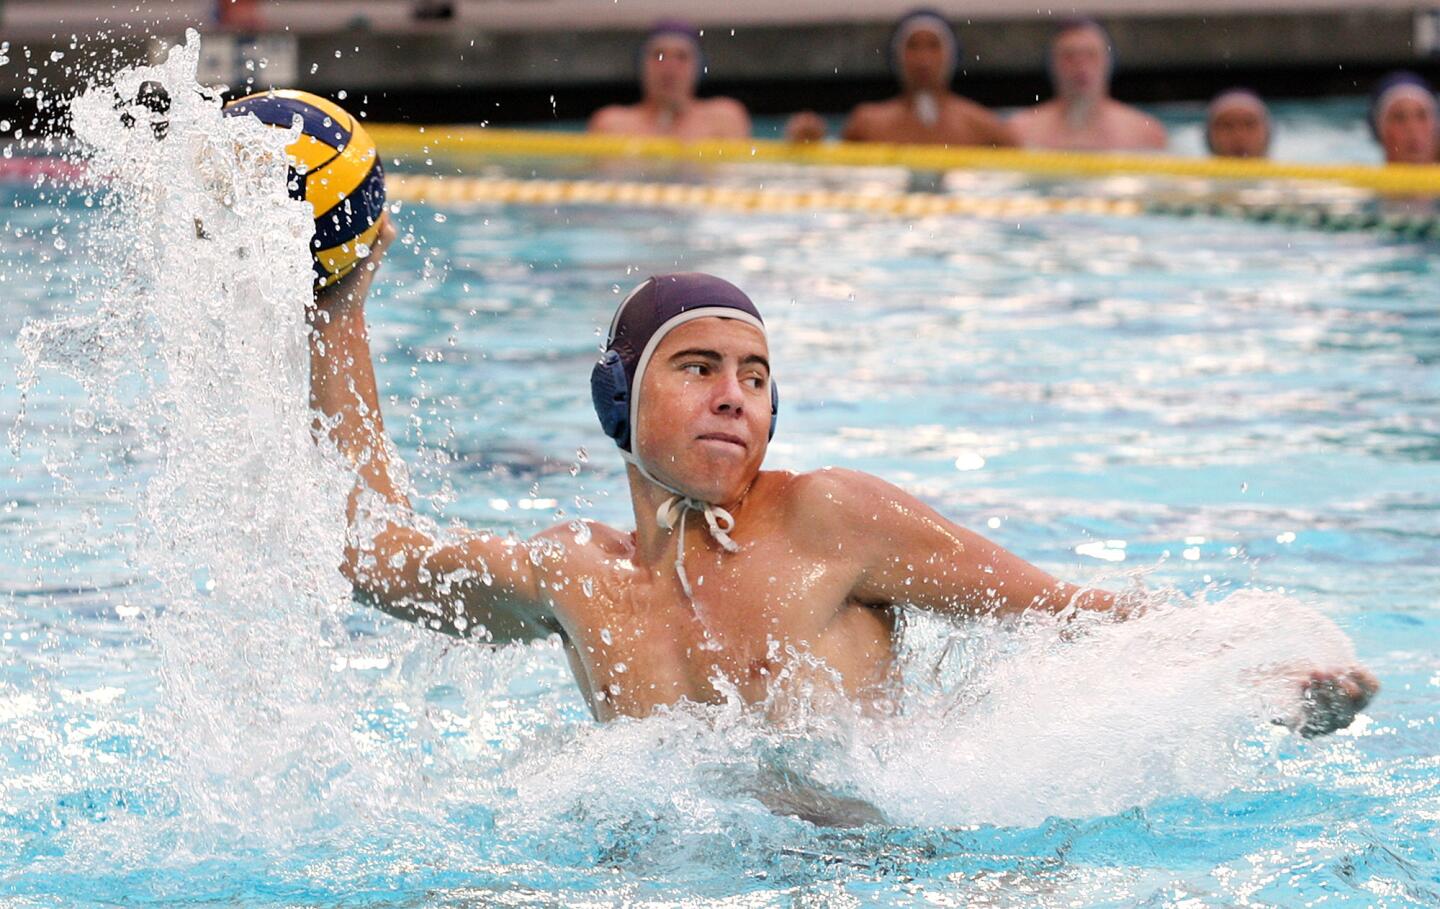 Crescenta Valley's against Pasadena in a Pacific League boys water polo first round playoff at Burbank High School on Tuesday, October 29, 2013. (Tim Berger/Staff Photographer)